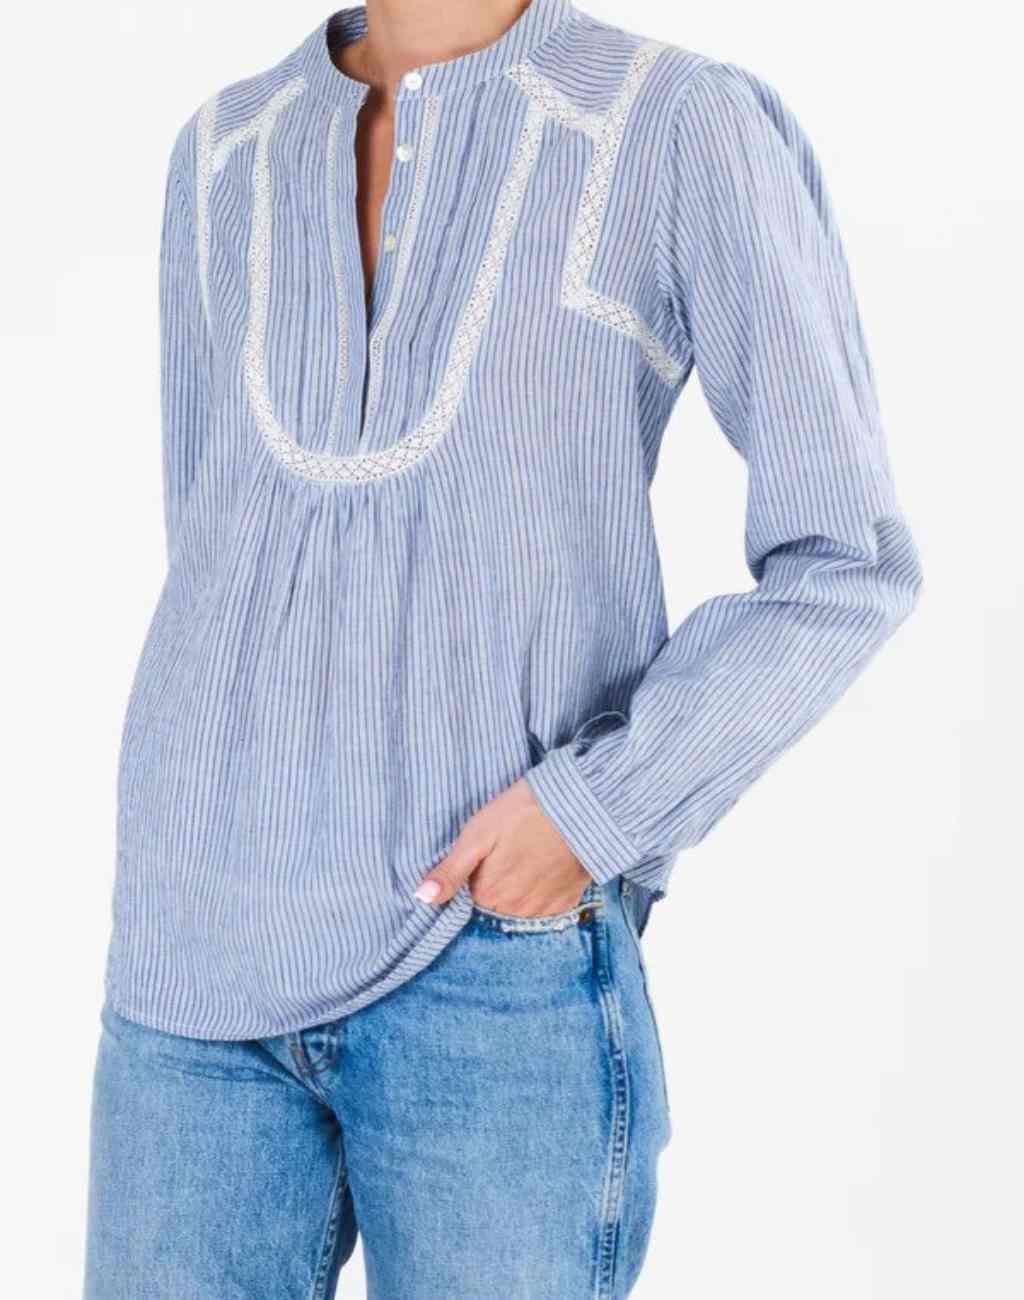 Blue and White Striped Adley Top with Lace Inserts and a Blousy 70&#39;s Vibe